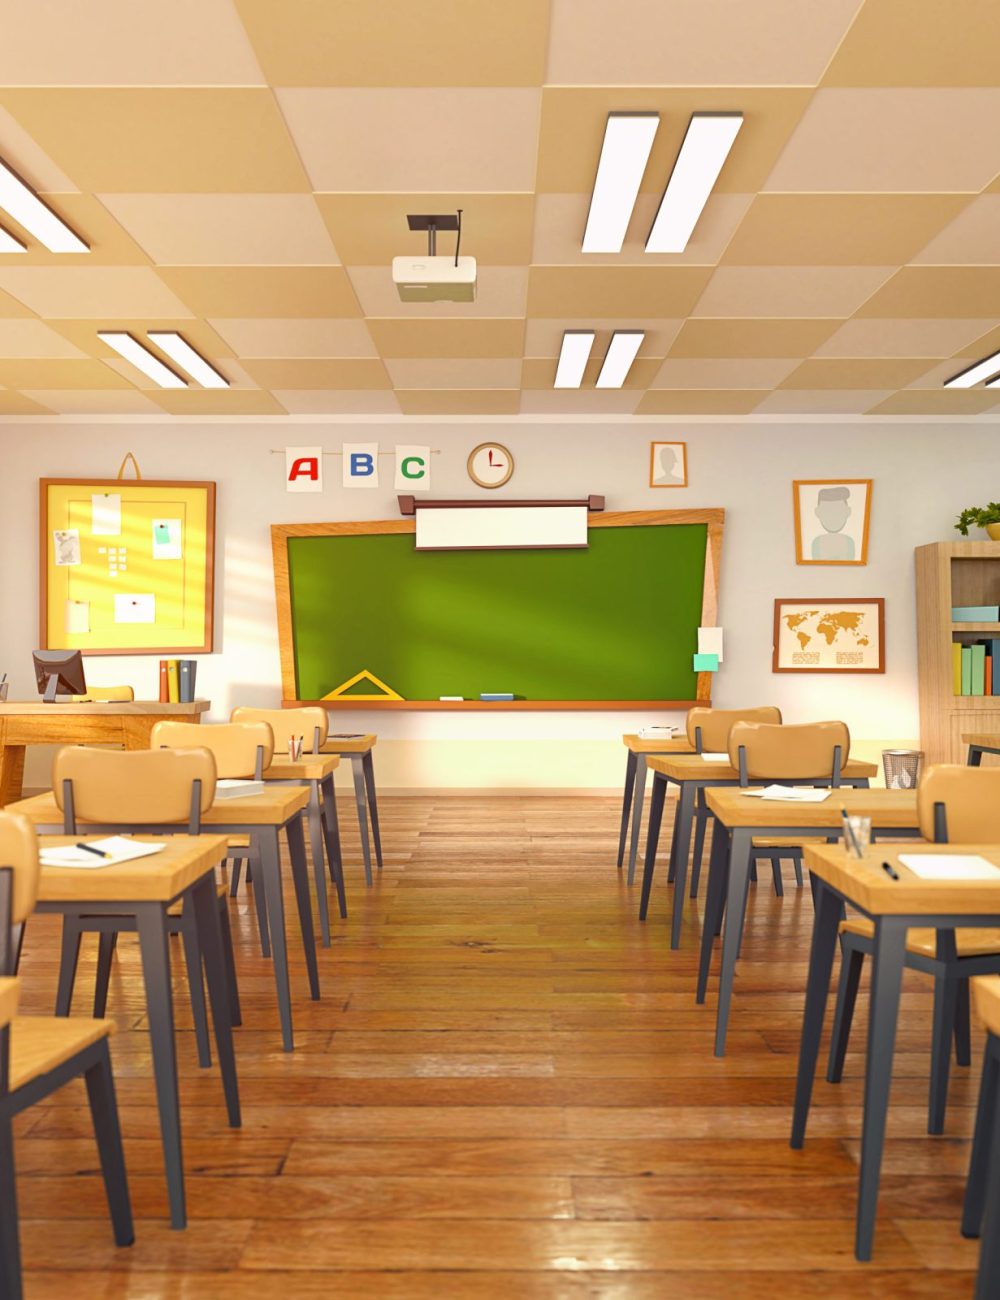 Empty school classroom in cartoon style. Education concept without students. 3d render interior illustration. Back to school design template.